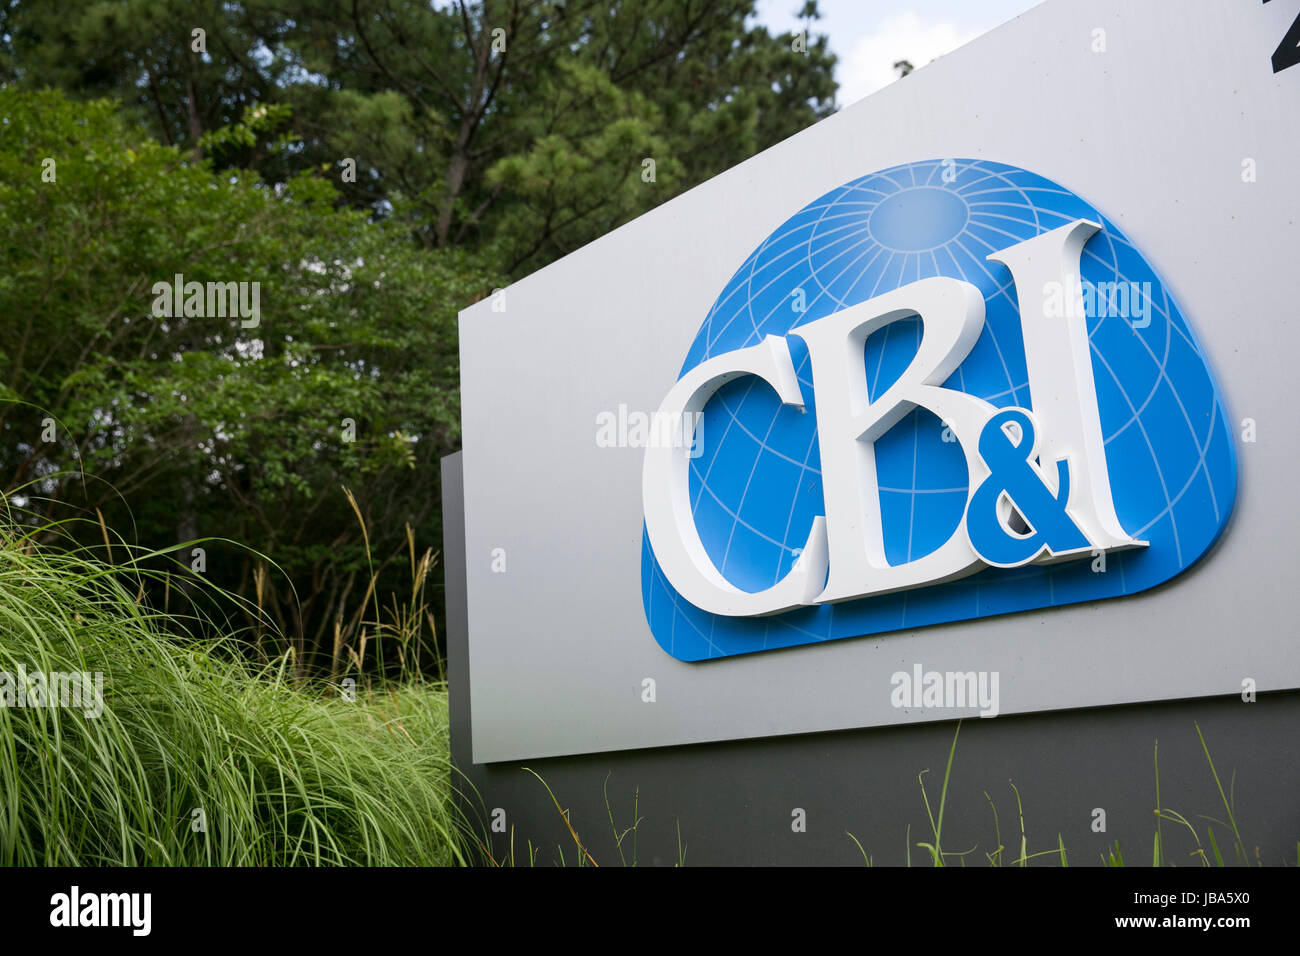 A logo sign outside of a facility occupied by the Chicago Bridge & Iron  Company (CB&I) in The Woodlands, Texas, on May 28, 2017 Stock Photo - Alamy